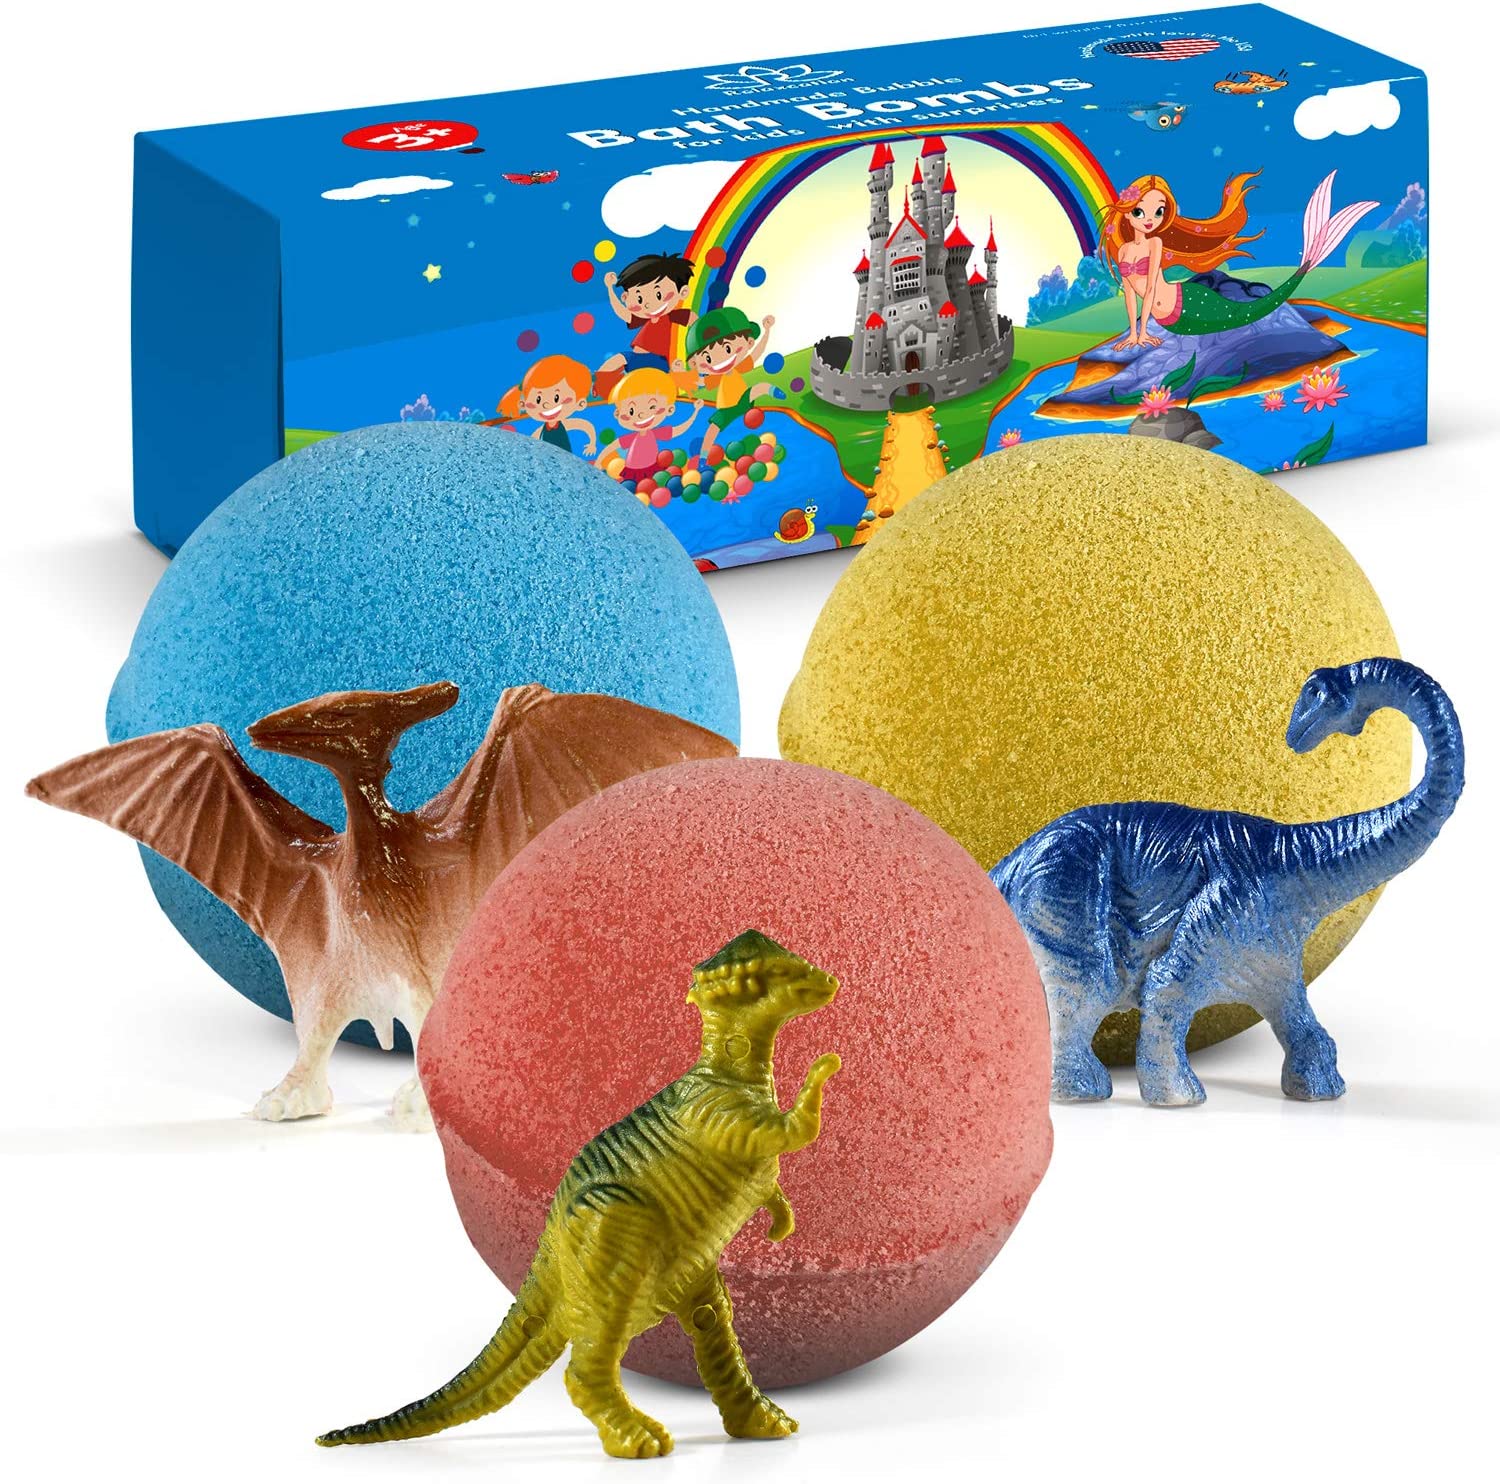 Bath Bombs For Kids With Surprise Dinosaurs Inside